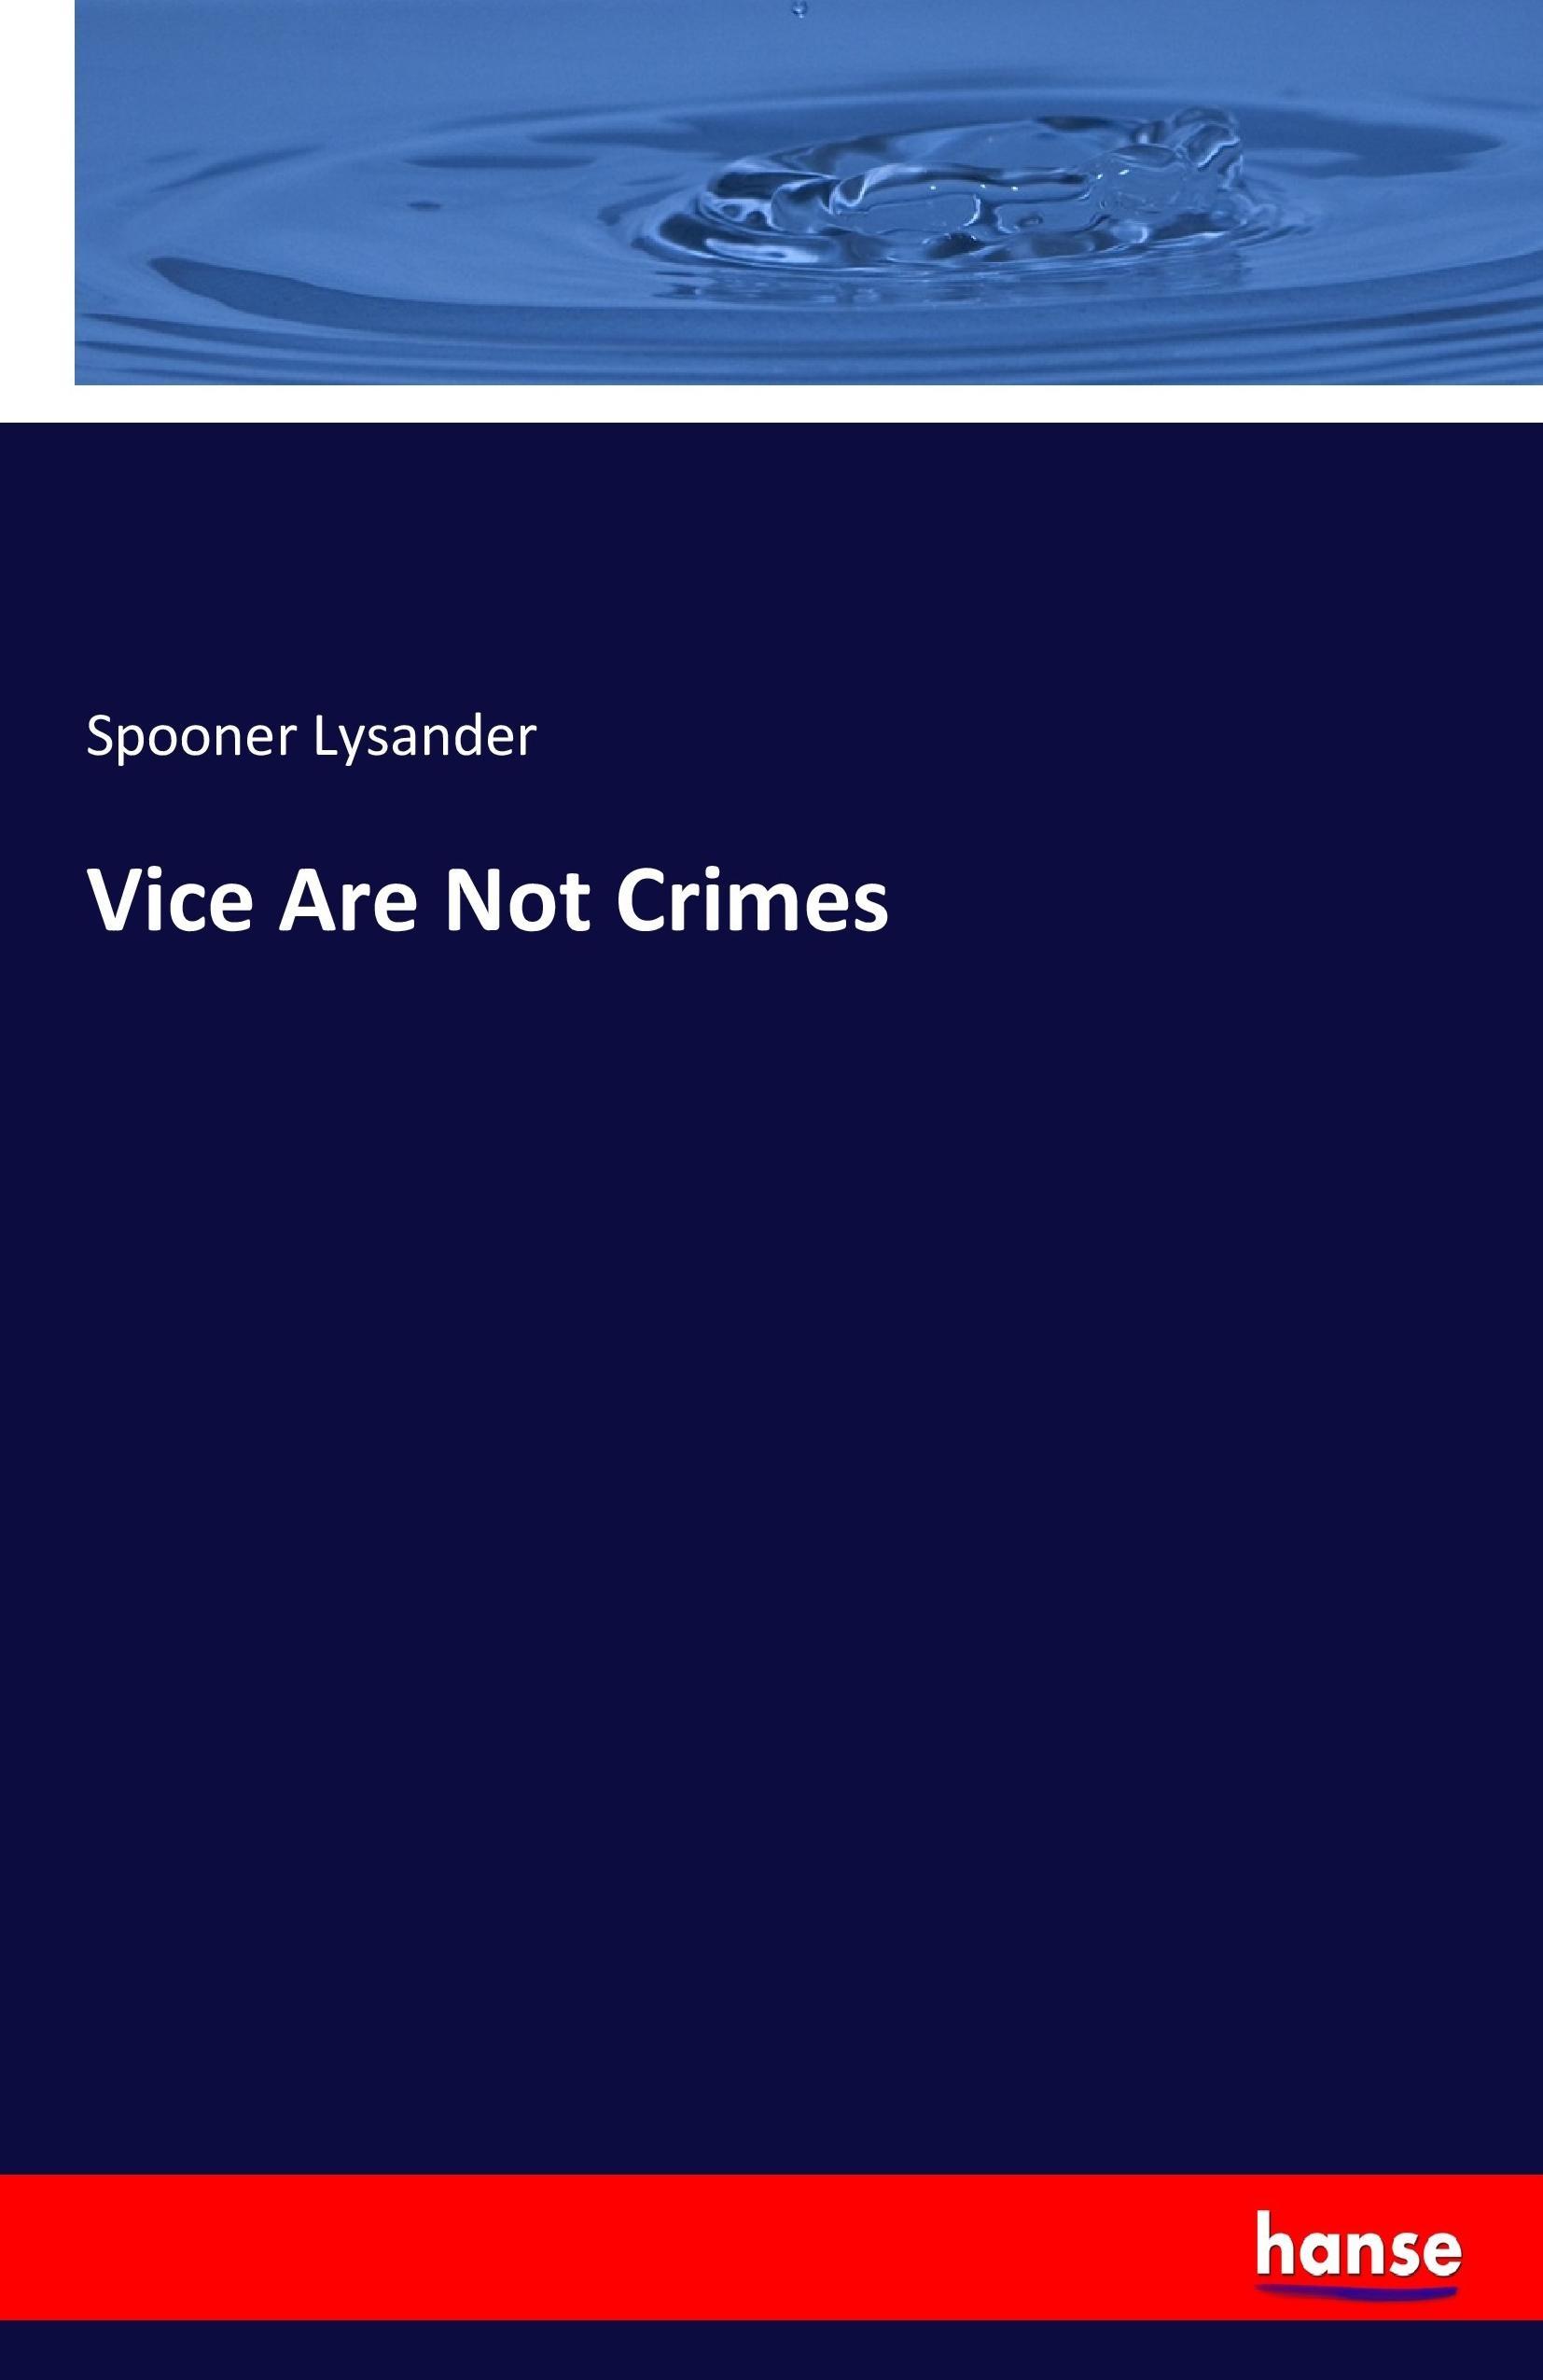 Vice Are Not Crimes